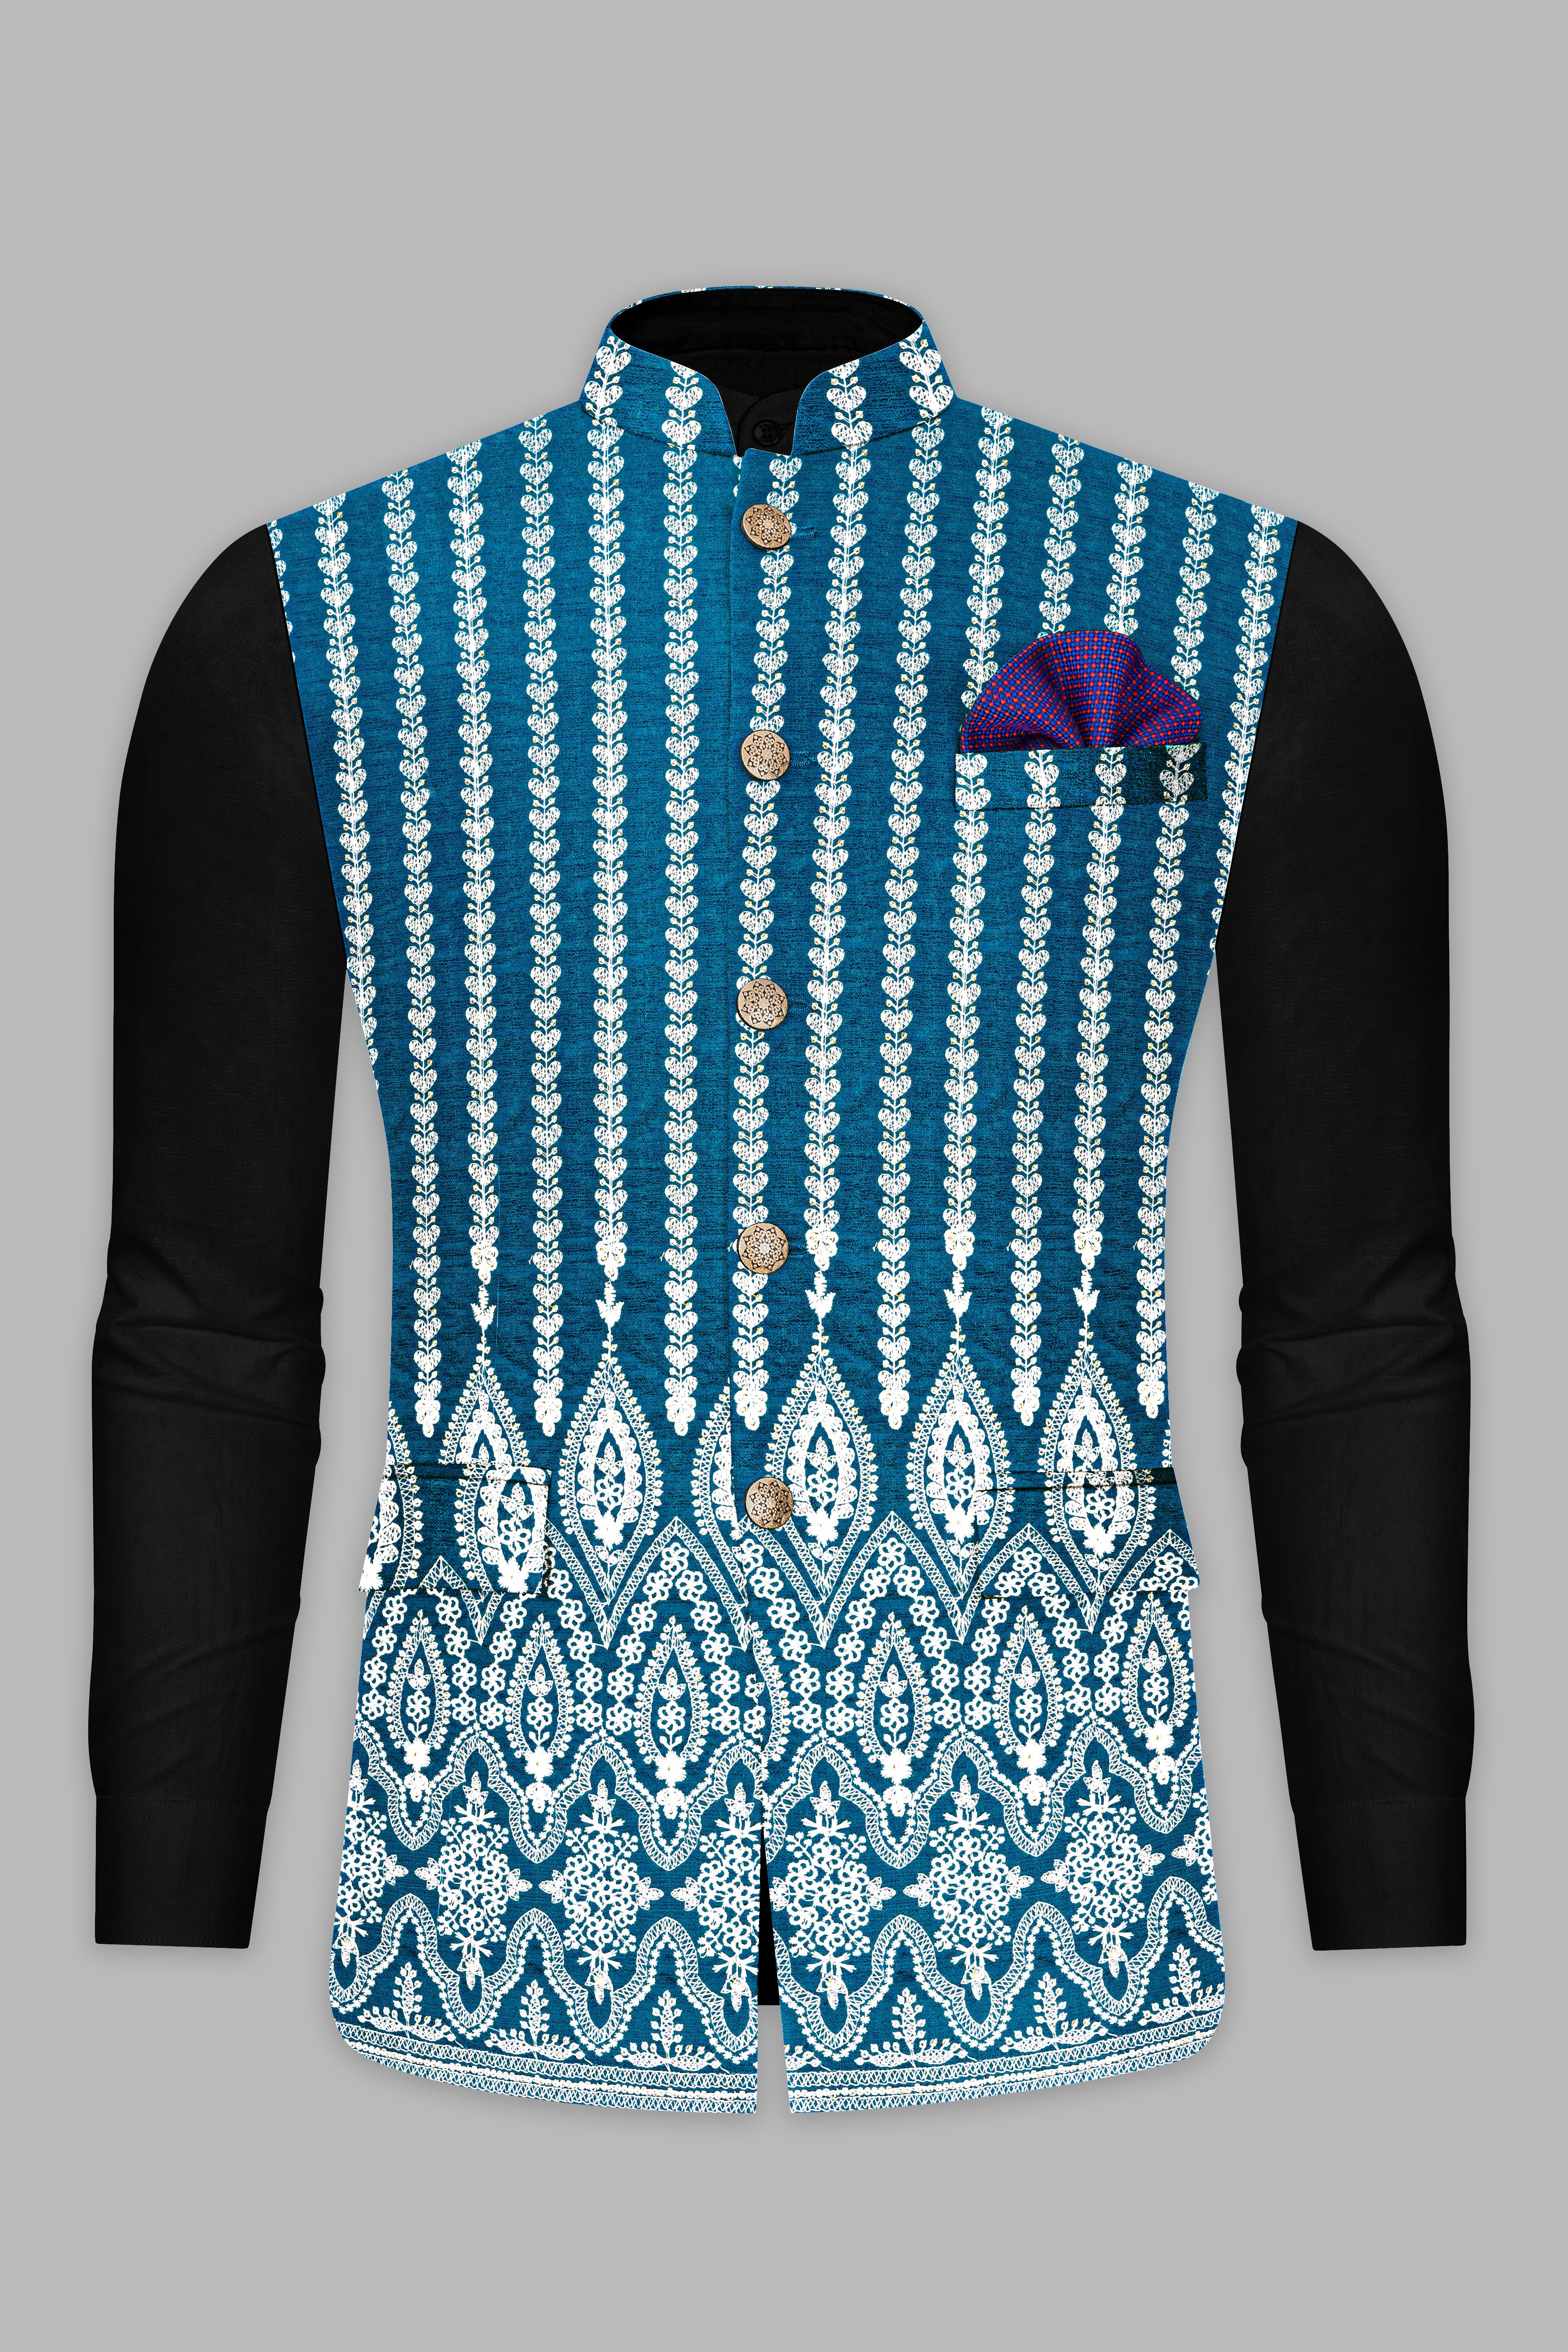 Cerulean Blue and White Thread Embroidered Nehru Jacket WC3518-36,  WC3518-38,  WC3518-40,  WC3518-42,  WC3518-44,  WC3518-46,  WC3518-48,  WC3518-50,  WC3518-52,  WC3518-54,  WC3518-56,  WC3518-58,  WC3518-60